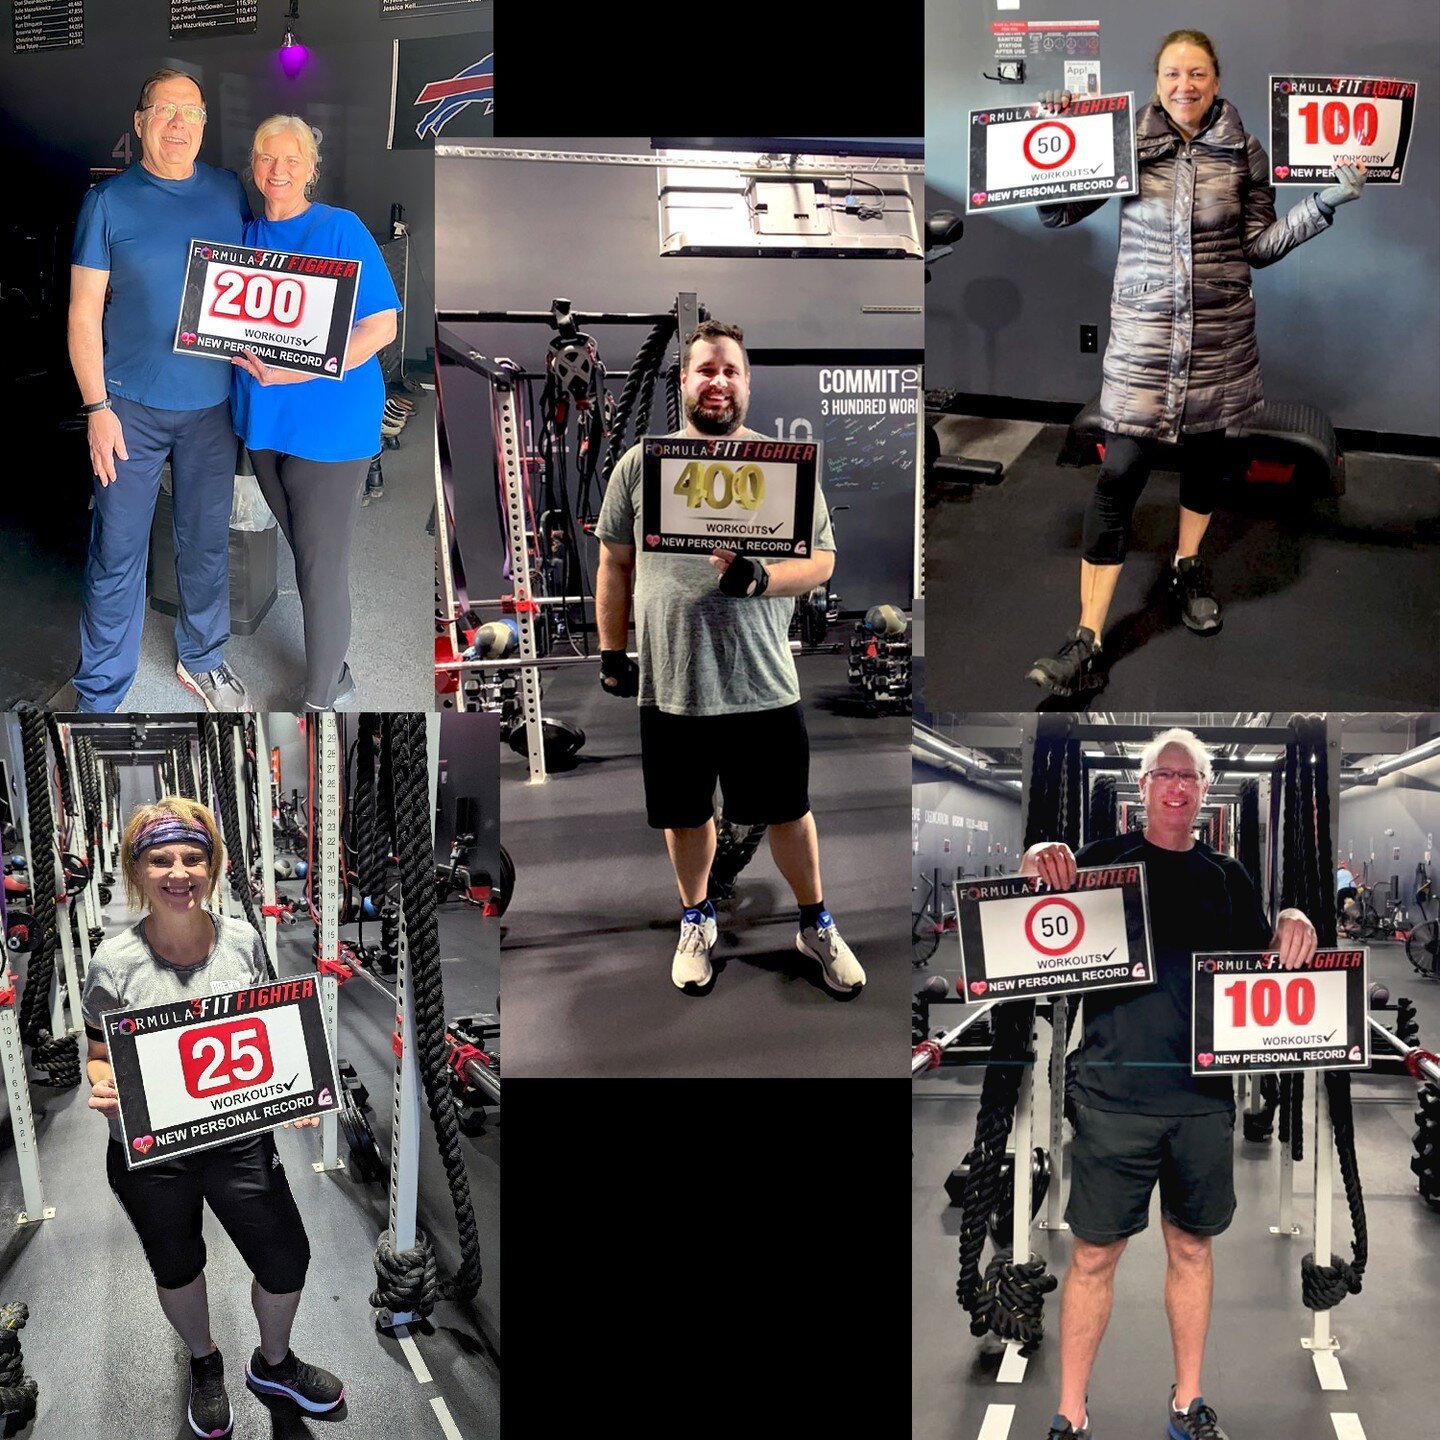 Milestone Mania at F3Fit! 🏆 💪
We've been blown away by all the amazing milestone visits lately!  Our F3Fit family's dedication is truly inspiring! 🤩 🙌
Remember, persistence and consistency are key! Every workout you complete is a positive step fo